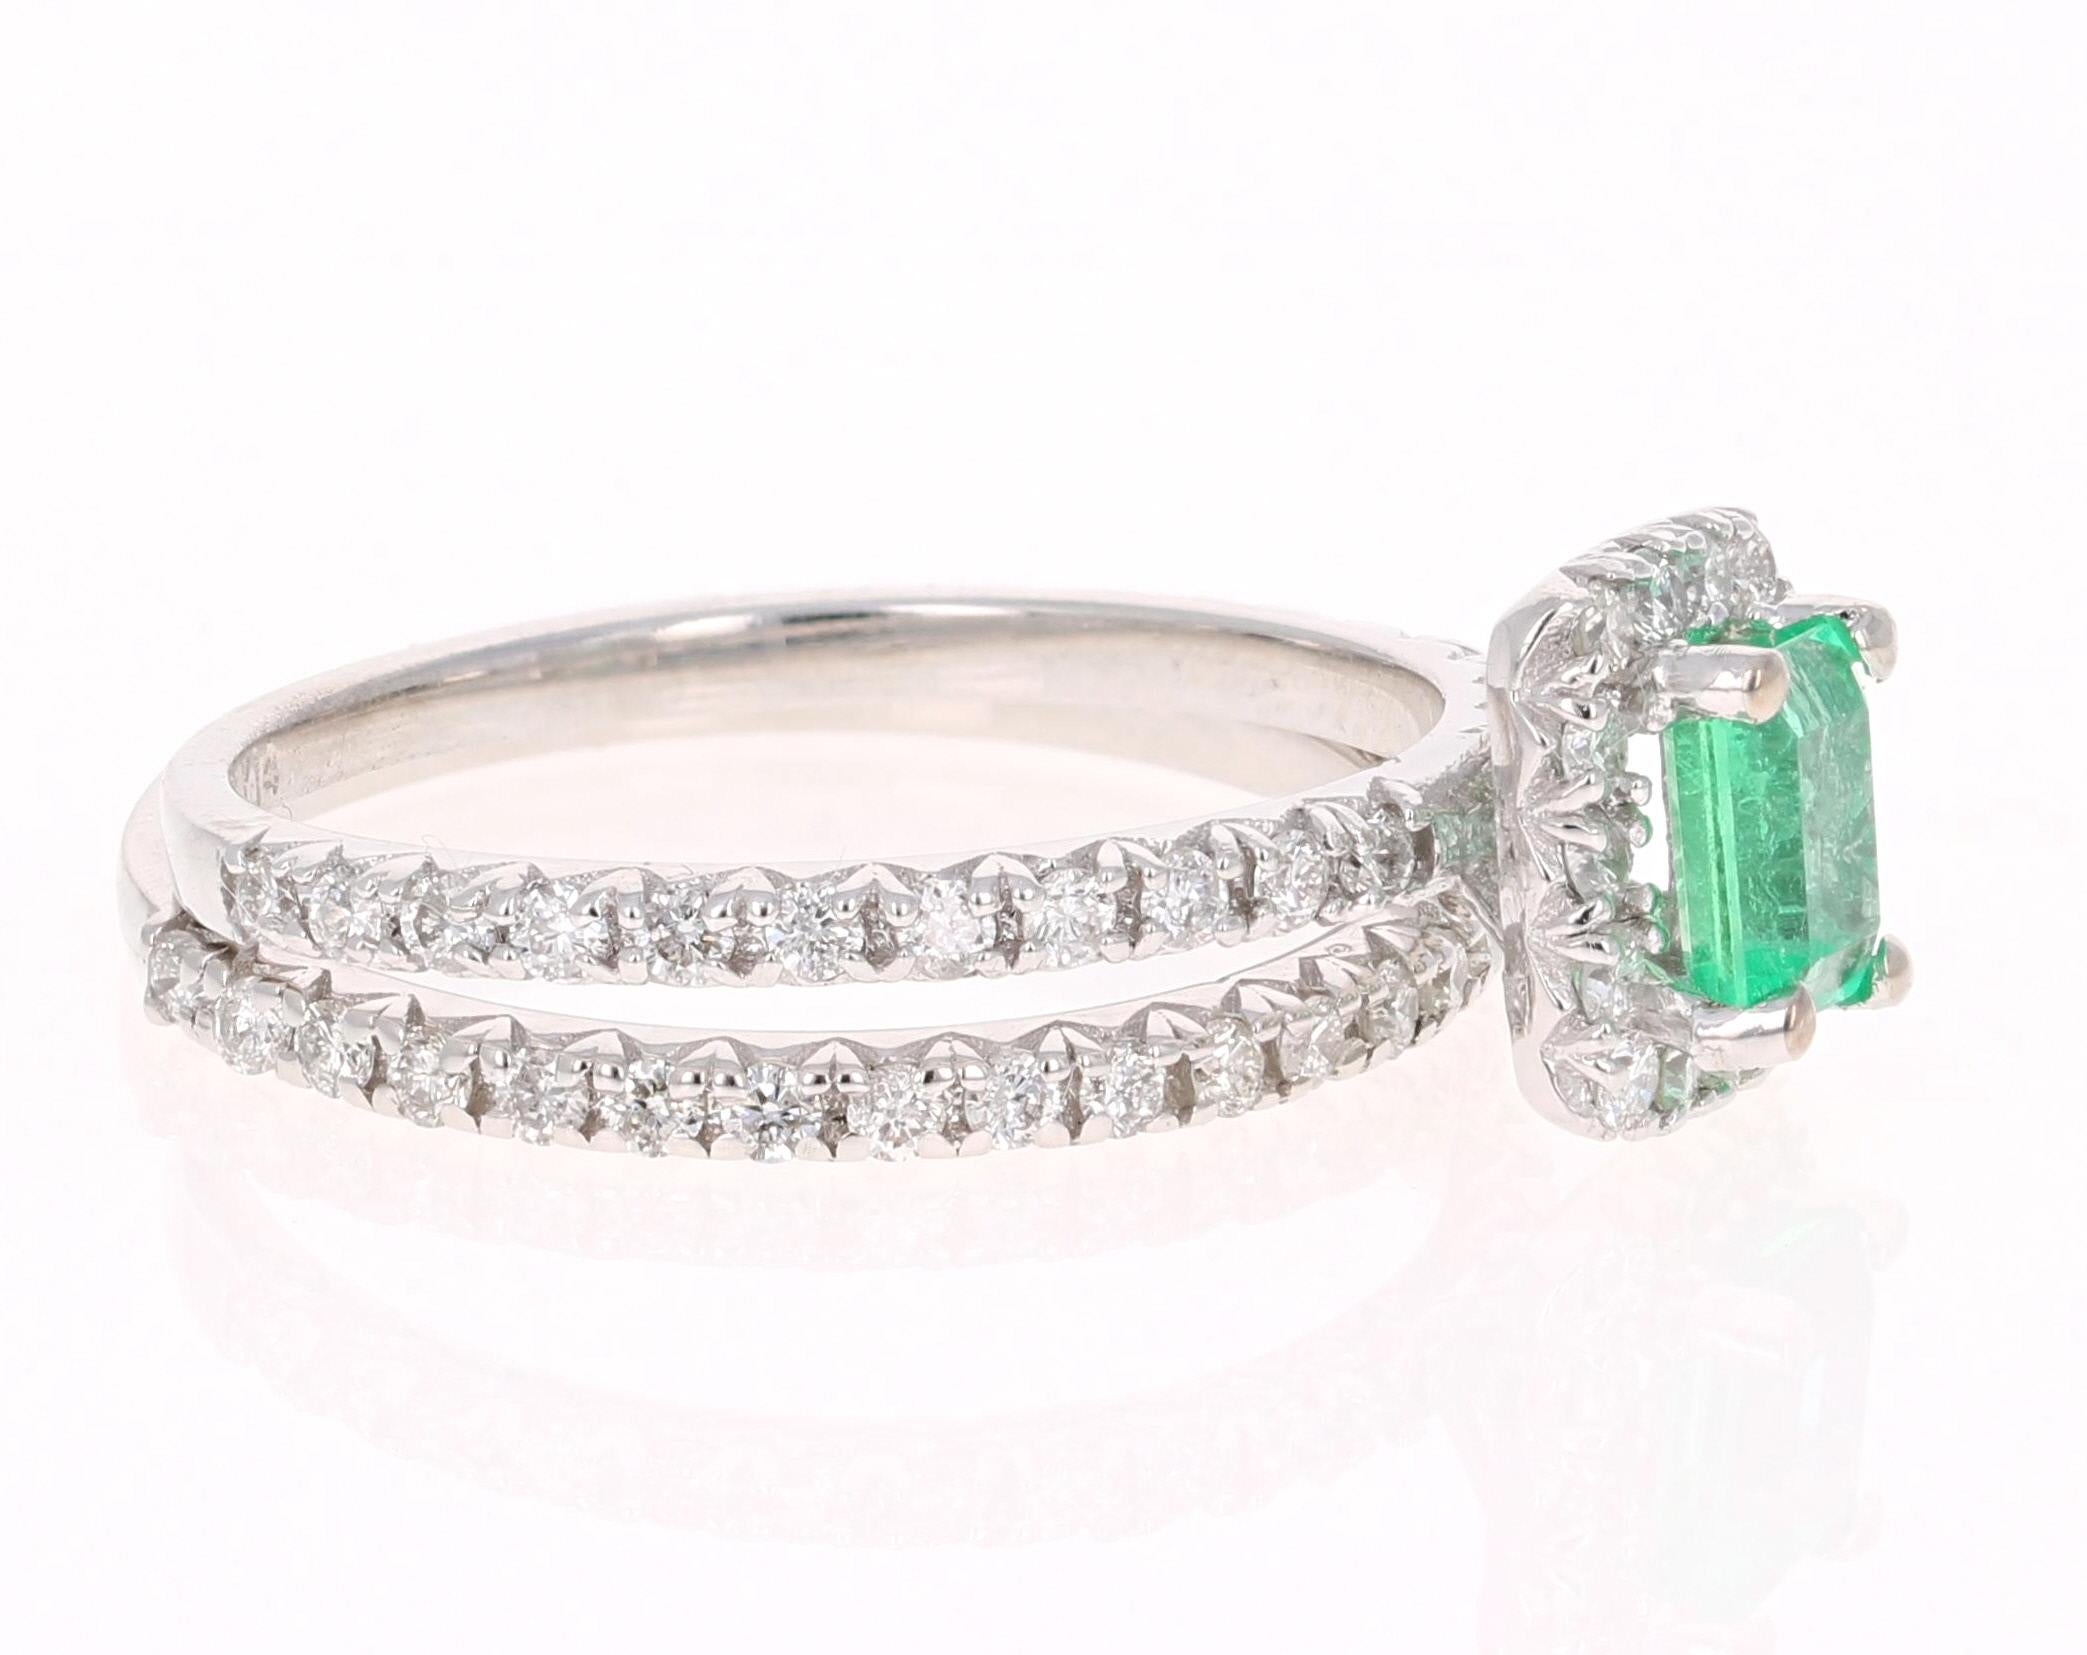 A simple setting with a wedding band holding a beautiful natural Emerald that weighs 0.48 Carats surrounded by 61 Round Cut Diamonds weighing 0.75 Carats. 

The Emerald measures at 5.5 mm x 4.5 mm and the face of the ring measures at approximately